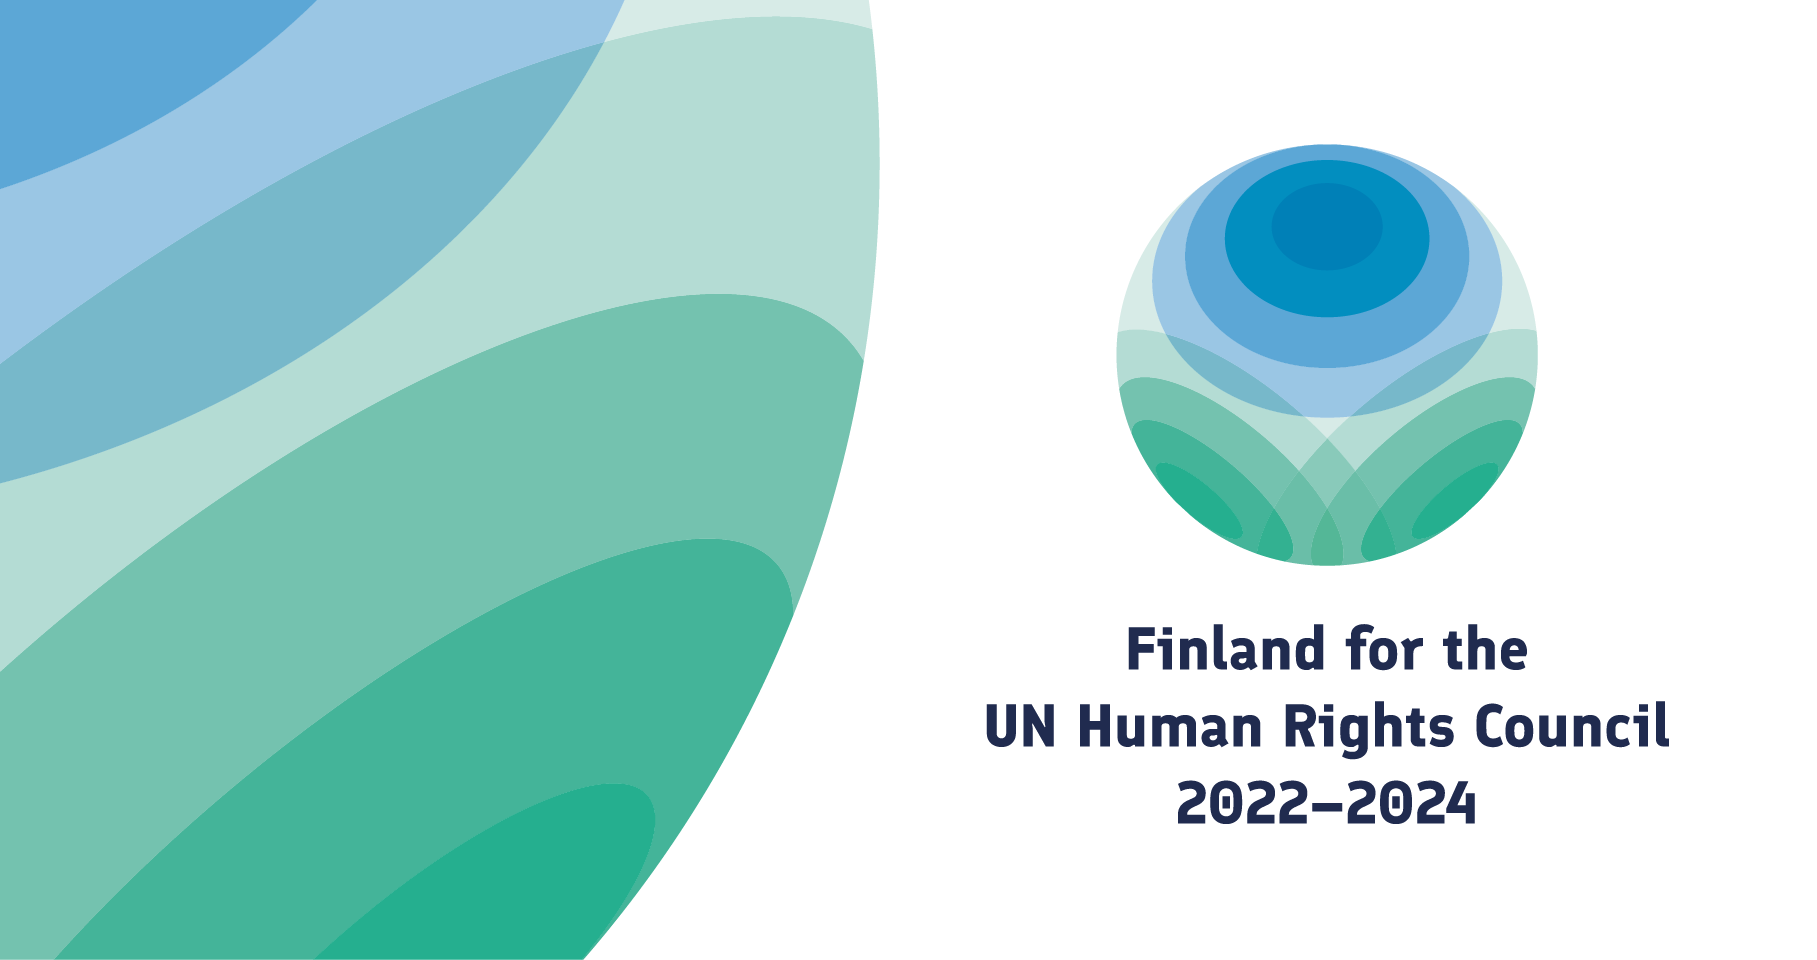 Finland launched candidacy campaign for the UN Human Rights Council